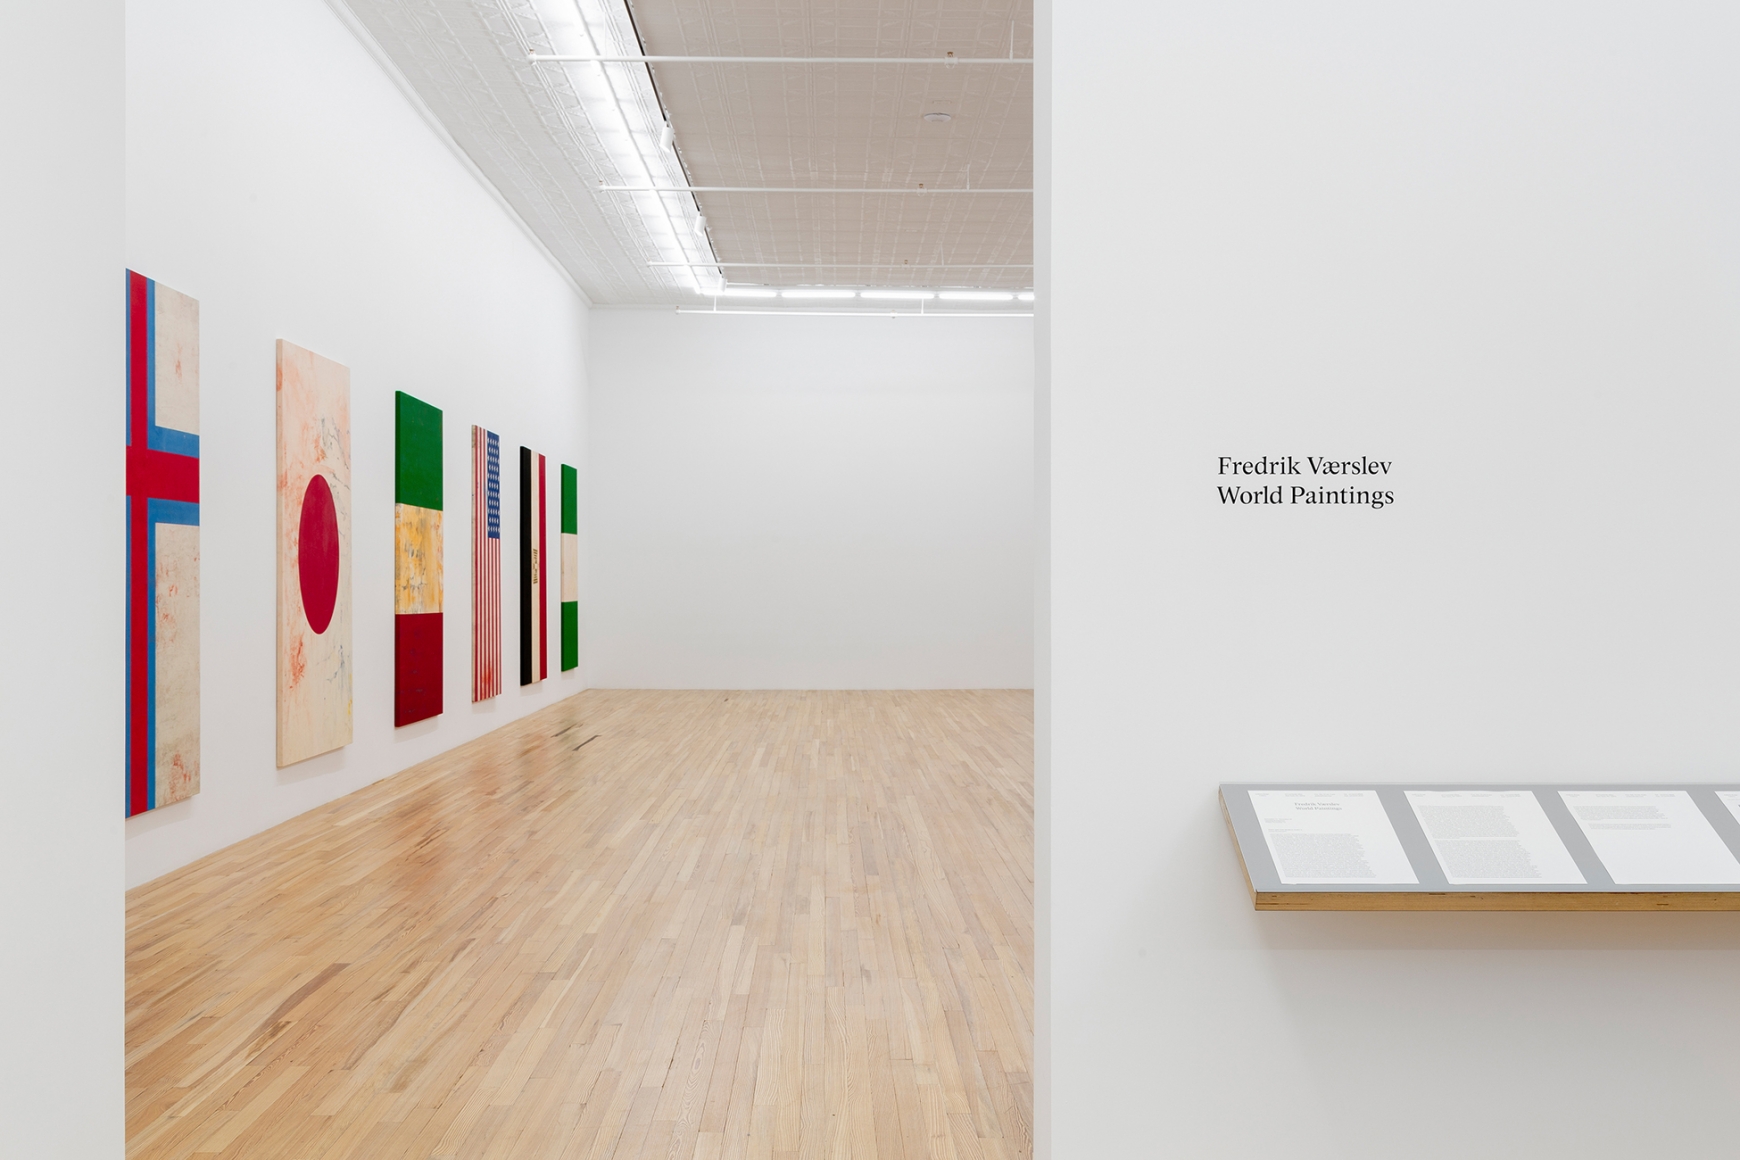 Exhibition text in a gallery. Six paintings og flags hang on the left side wall. Exhibition material sits on an aluminum shelf below vinyl text.